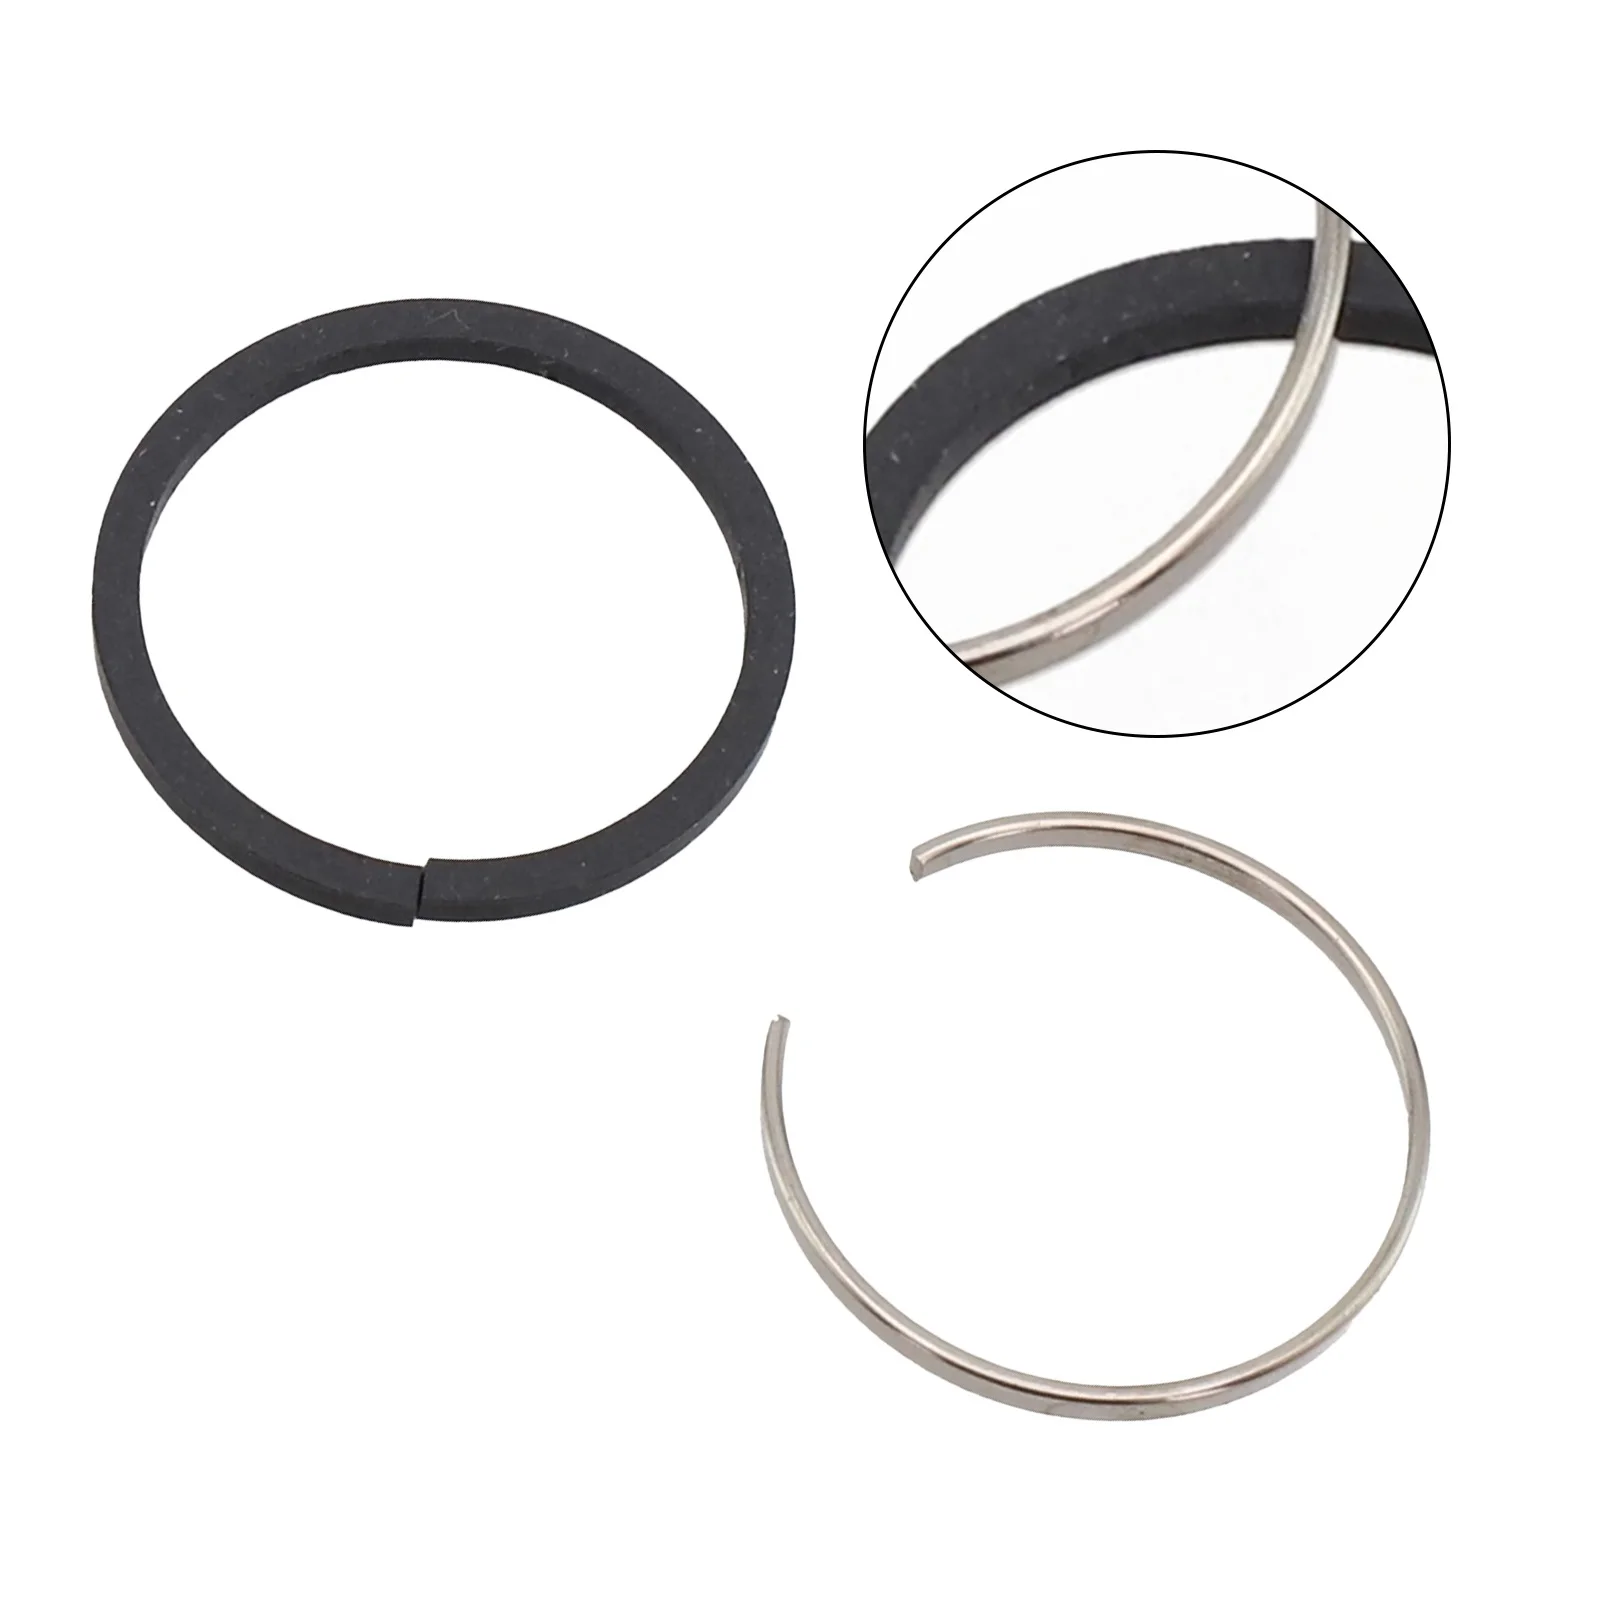 

2pcs Metal Piston Rings Steel Ring For HM0810 Electric Pick Demolition Hammer Tools Parts Metal Power Tool Accessories